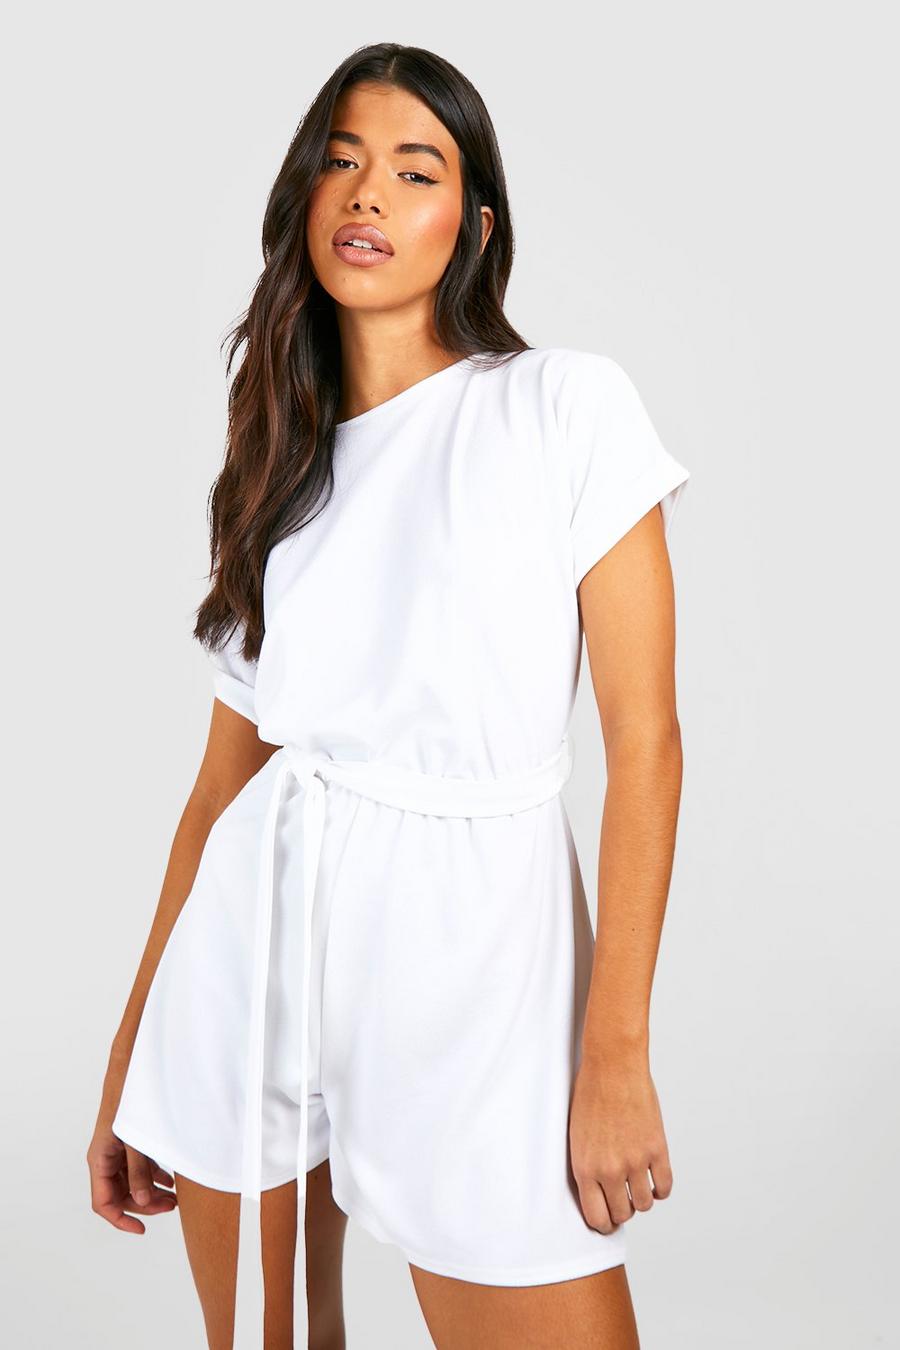 FOUND: Rompers for Tall Girls (Yep, They Exist!)